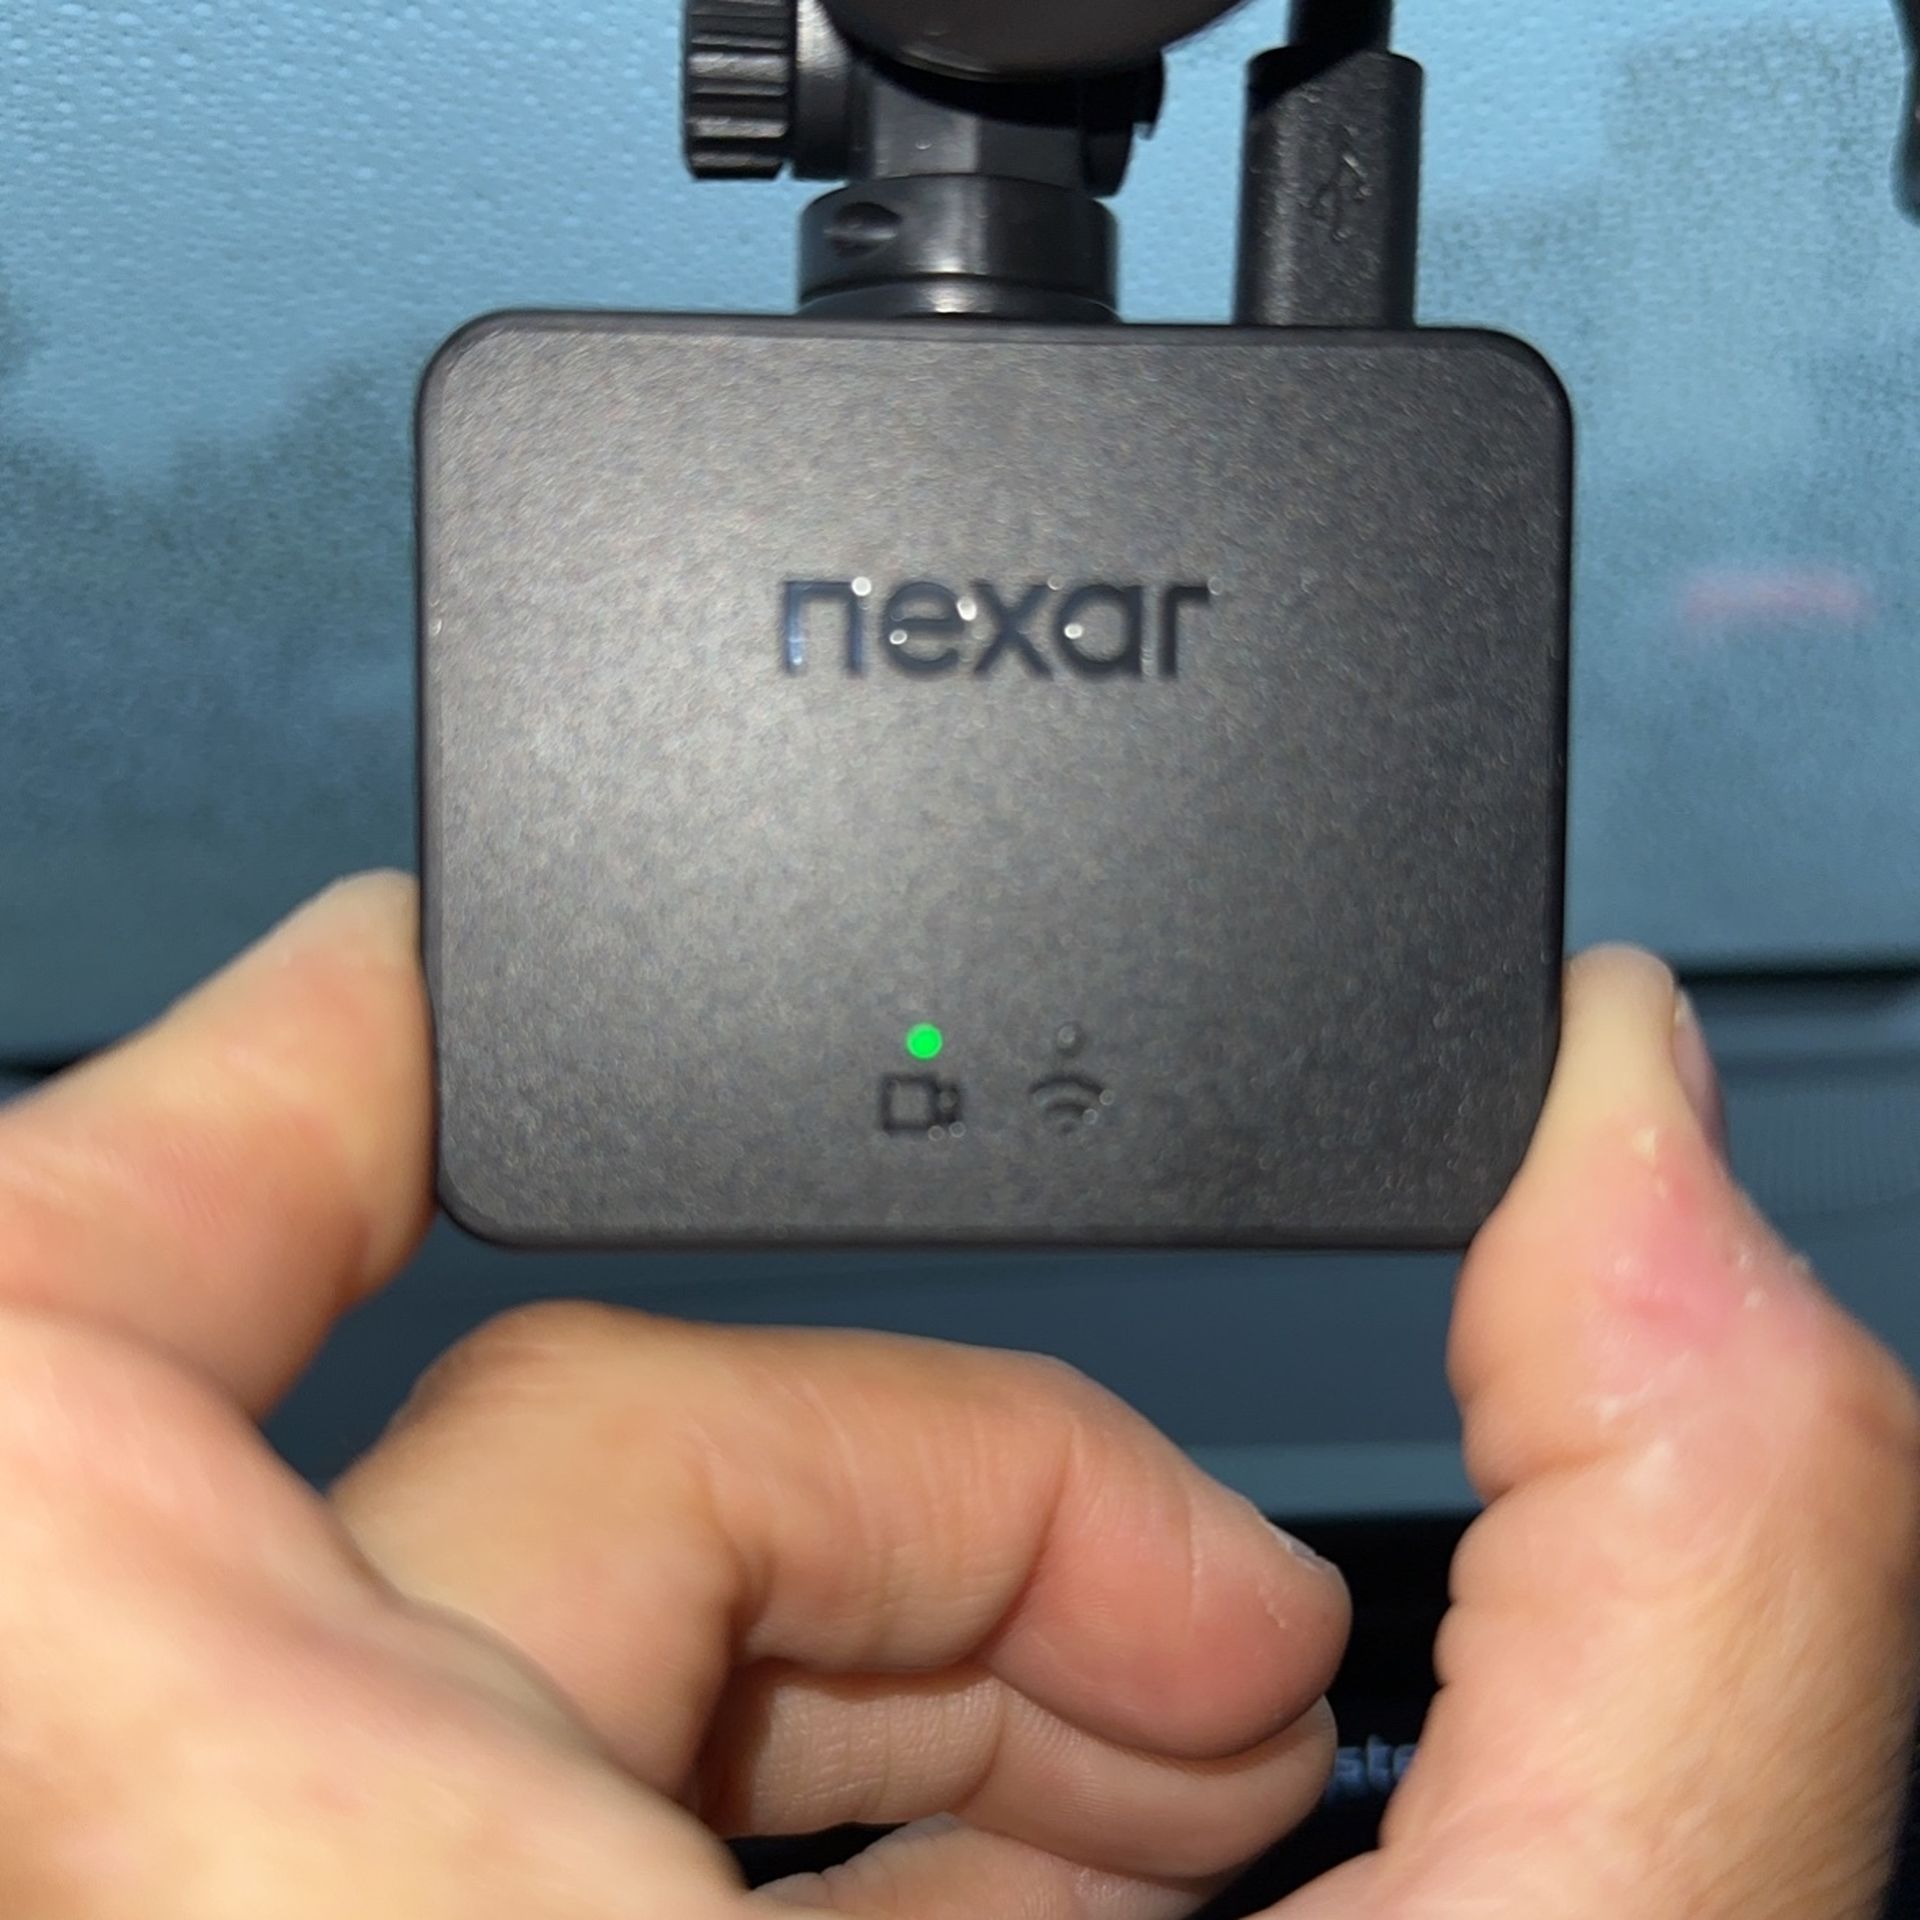 Nexar Beam GPS Dash Cam 1080p Full HD @ 30 FPS Wi-Fi, Built-in G-sensor for  Sale in New Rochelle, NY - OfferUp